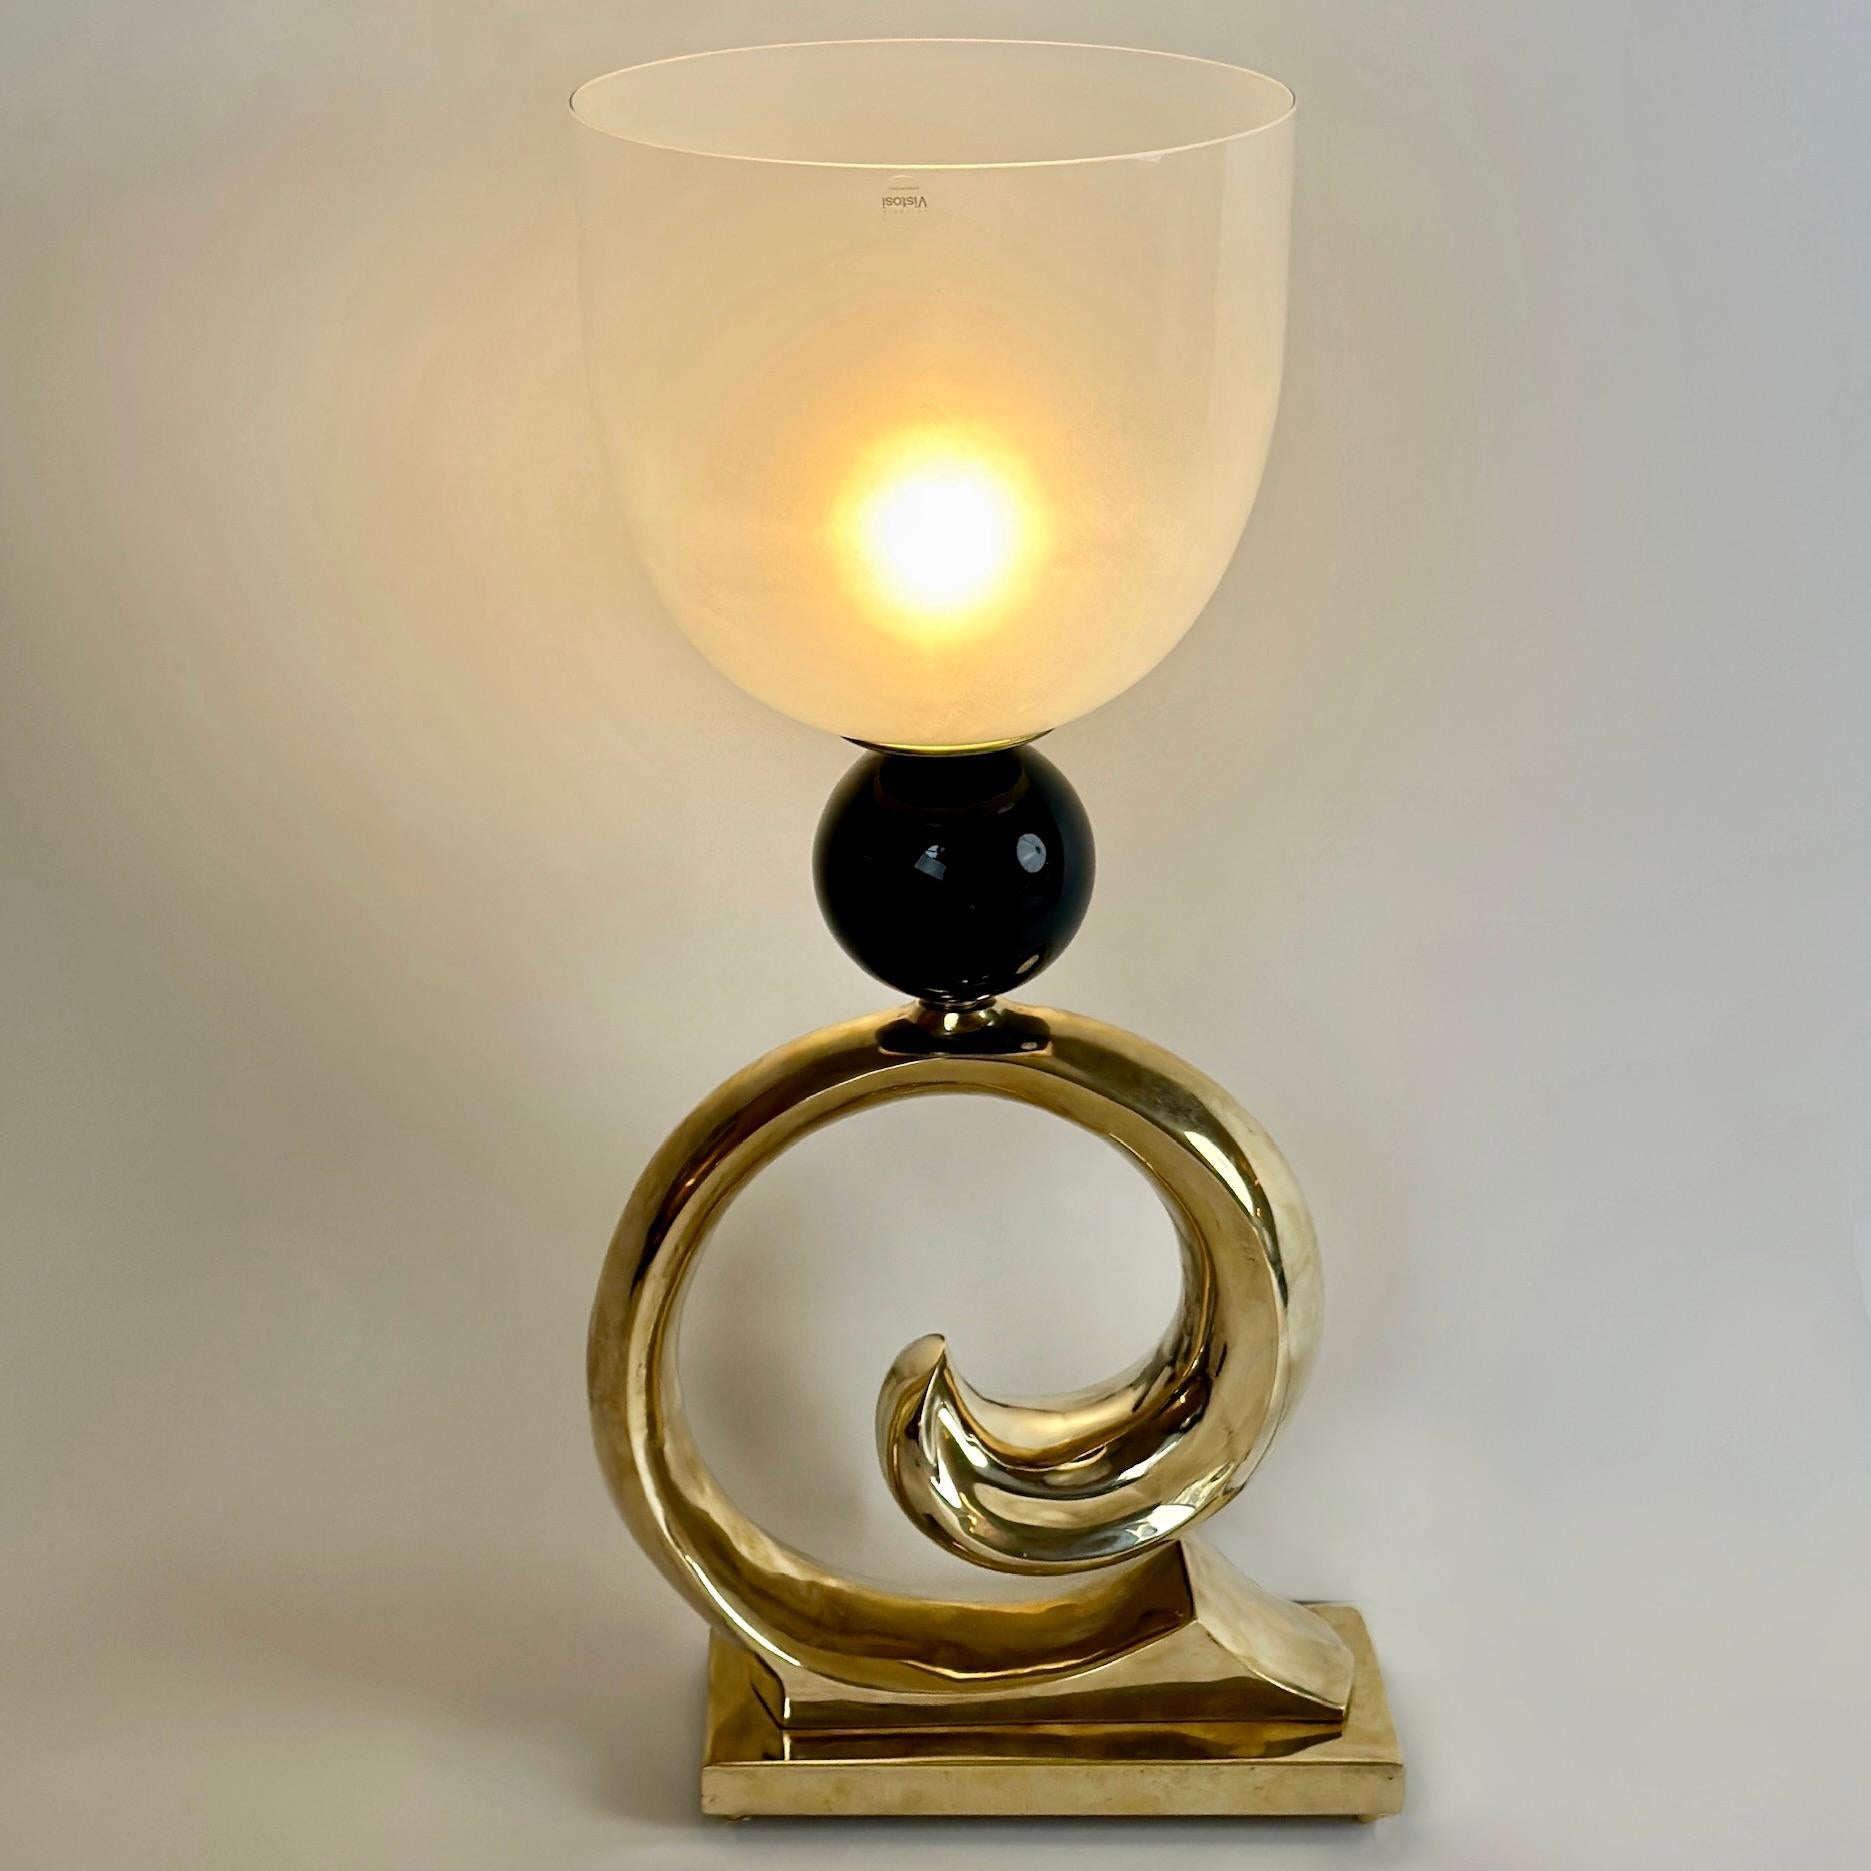 Stunning prototype that was never put into production by Vetrerie Vistosi. Brass body imitating a wave with a black ceramic boule and round white frosted Murano glass shade (30 diam. x 28 H cm.) to cover the E27 light bulb. The lamp comes with an